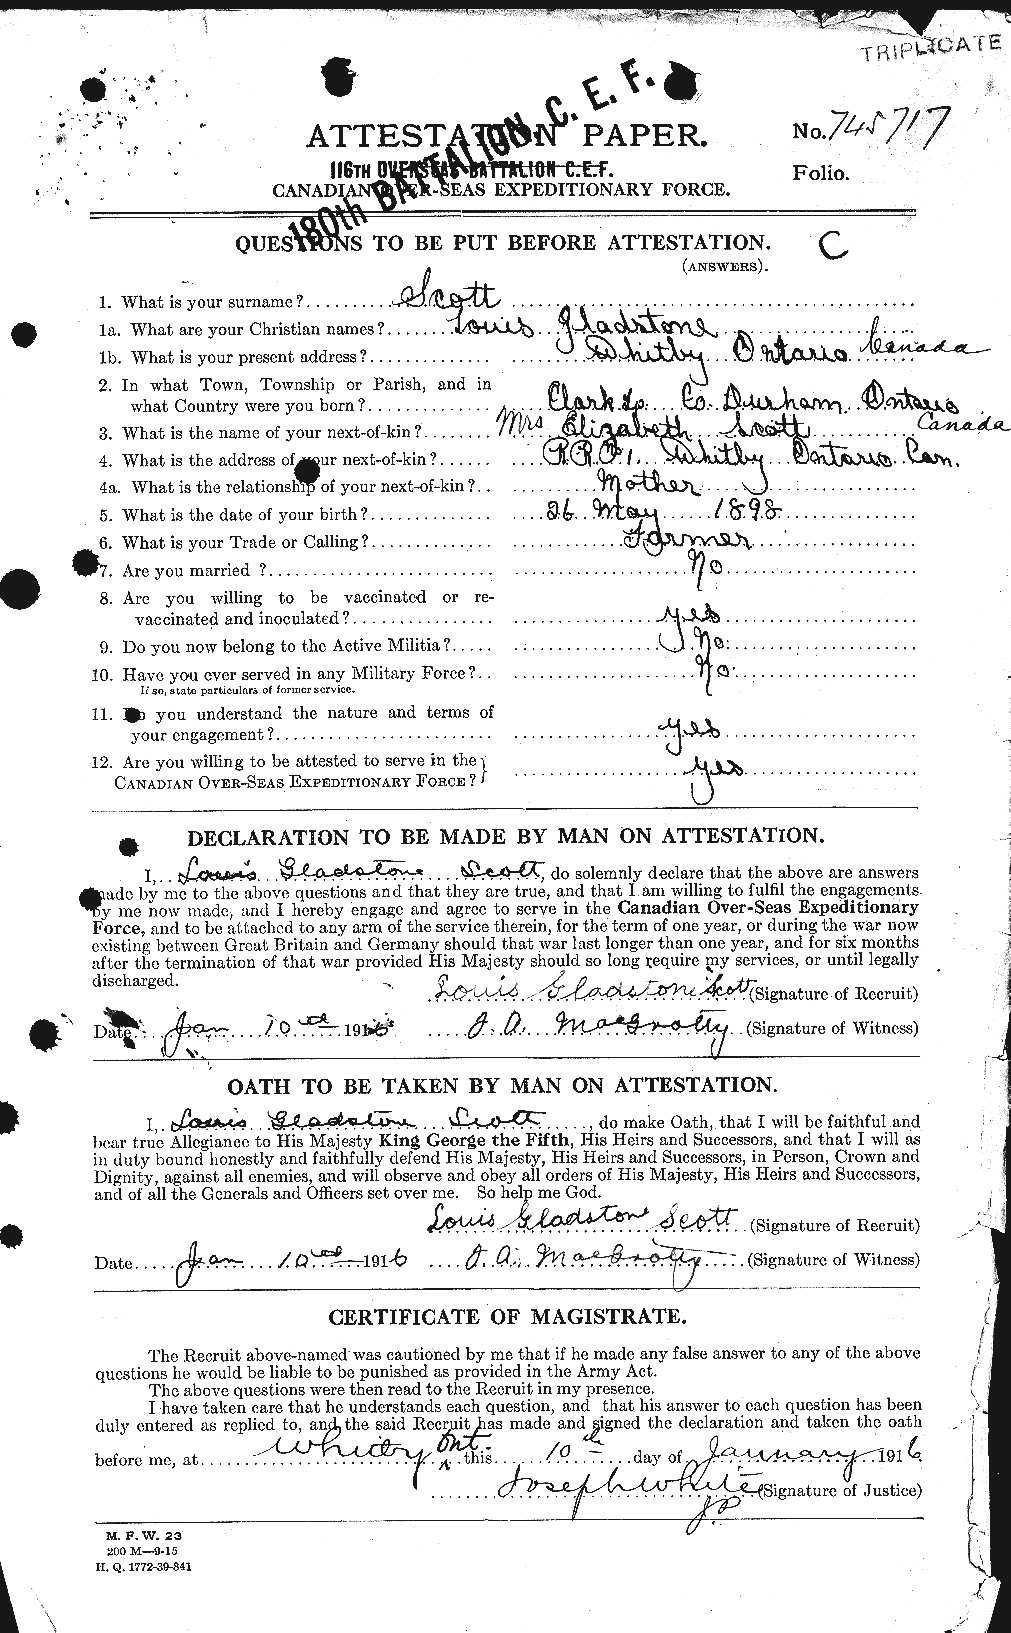 Personnel Records of the First World War - CEF 083524a